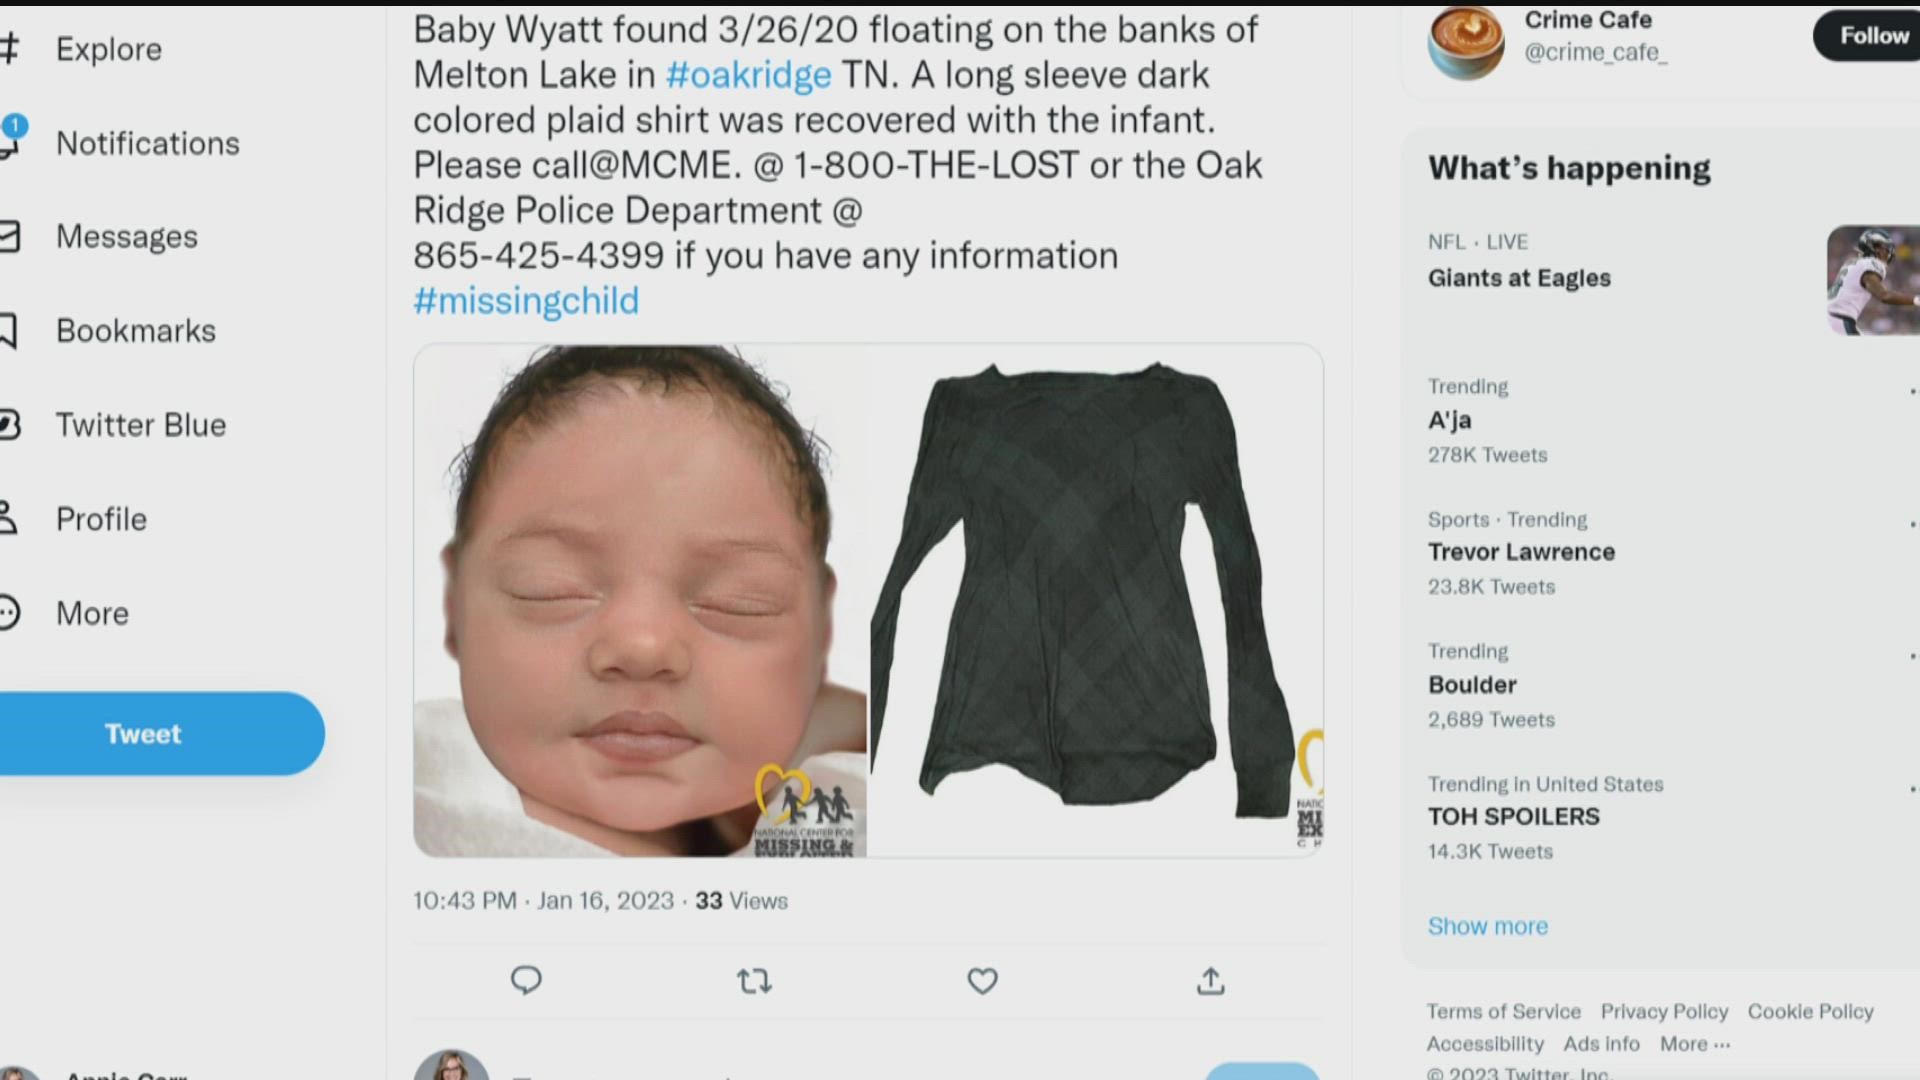 Oak Ridge Police are asking for your help in identifying "Baby Wyatt," the name they gave to a little infant they found in 2020 on the banks of Melton Lake.